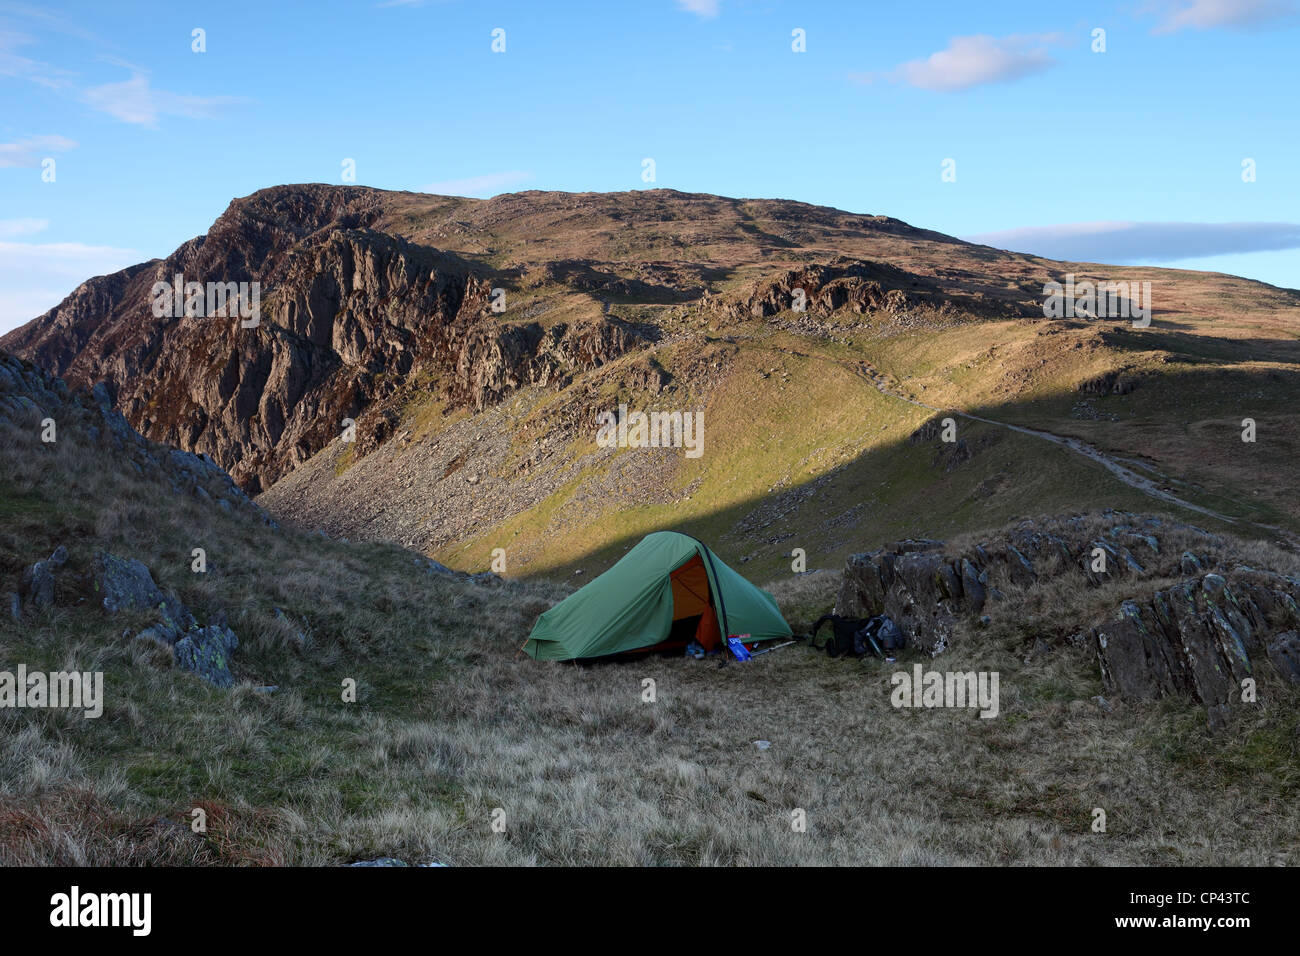 Lightweight Backpacking Tent on the Lower Slopes of Dale Head with the Mountain of High Spy Behind Lake District Cumbria UK Stock Photo